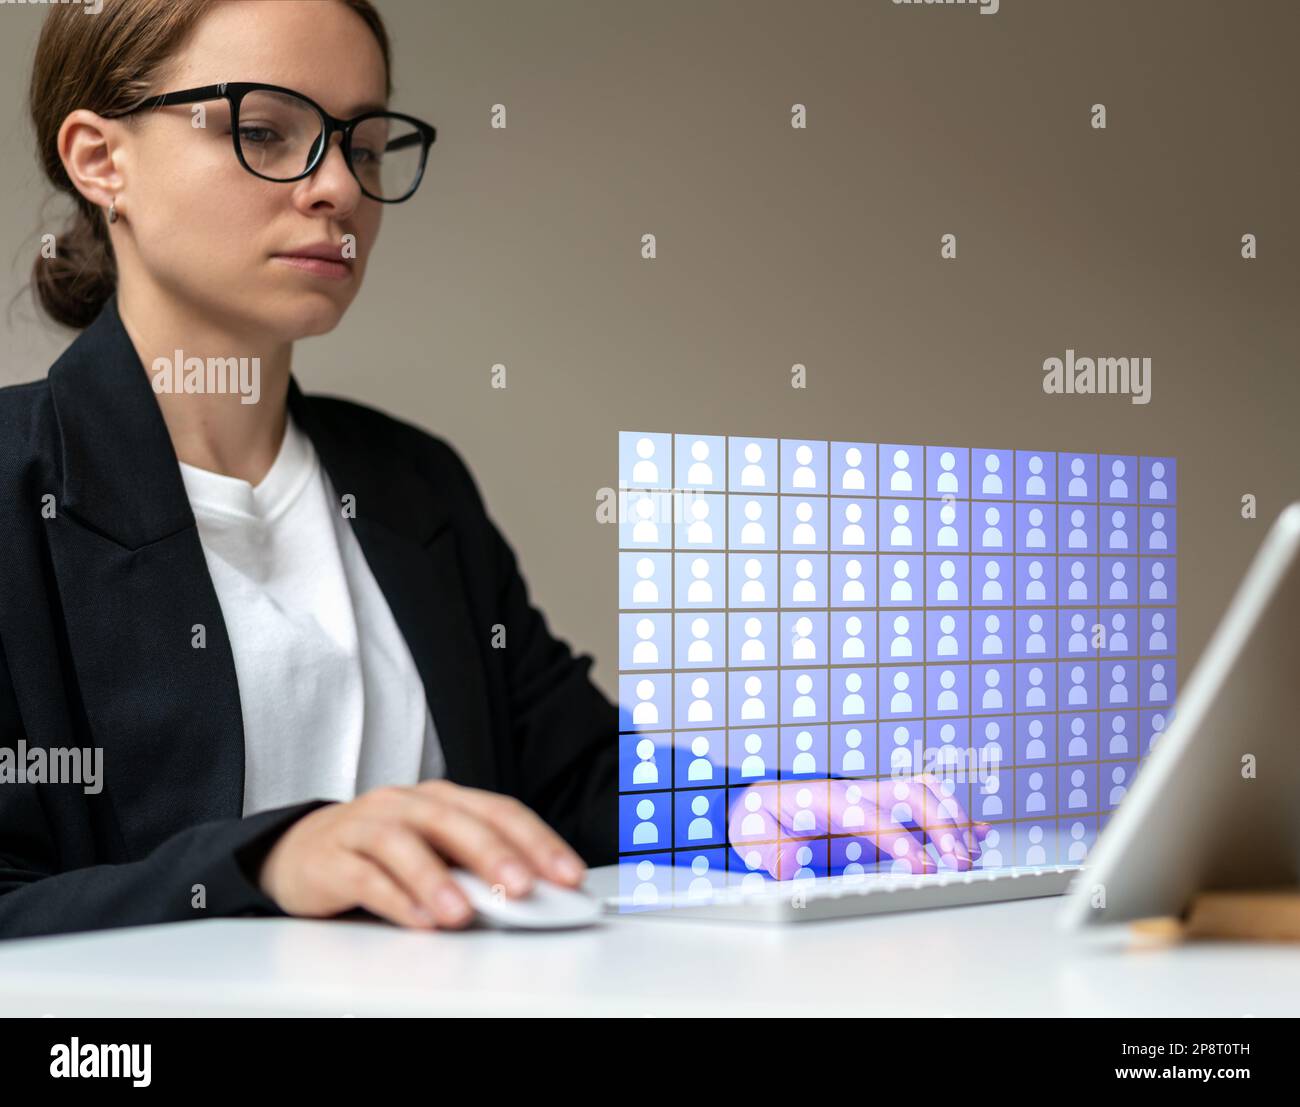 Human resource manager works with digital employee database. Stock Photo